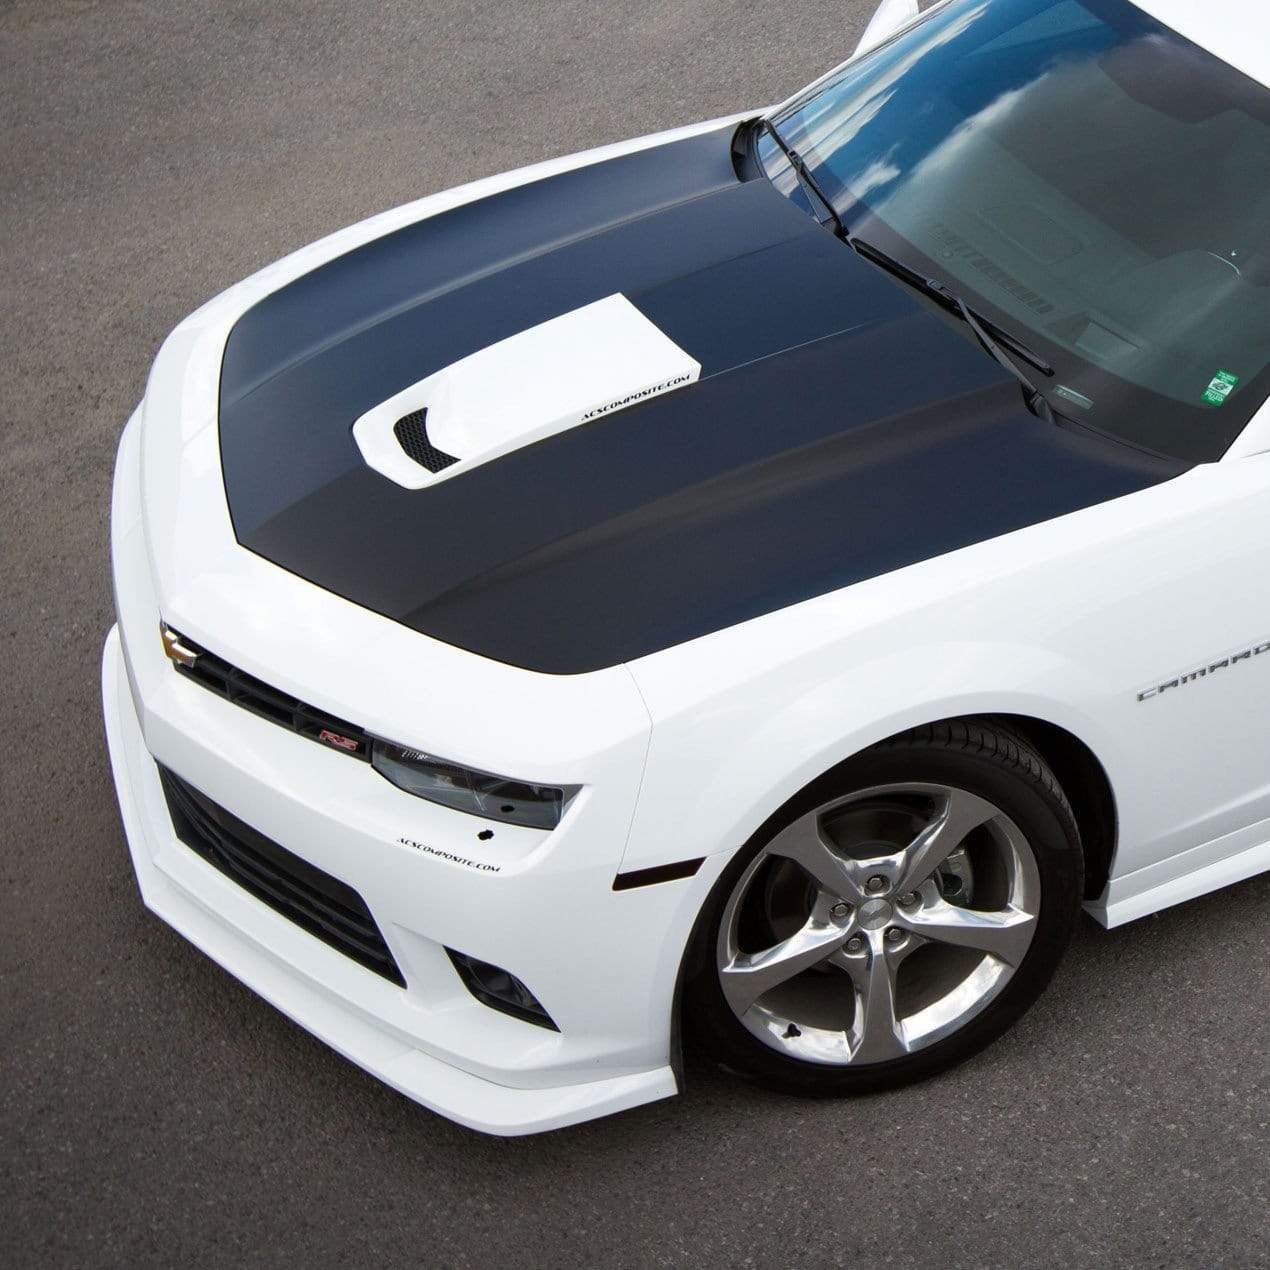 ACS-T4 Front Splitter in Satin Black for Camaro 2014-2015 SS [46-4-001]SBK: Enhance airflow, performance, and style while protecting your front end. No deflectors or rockers included.